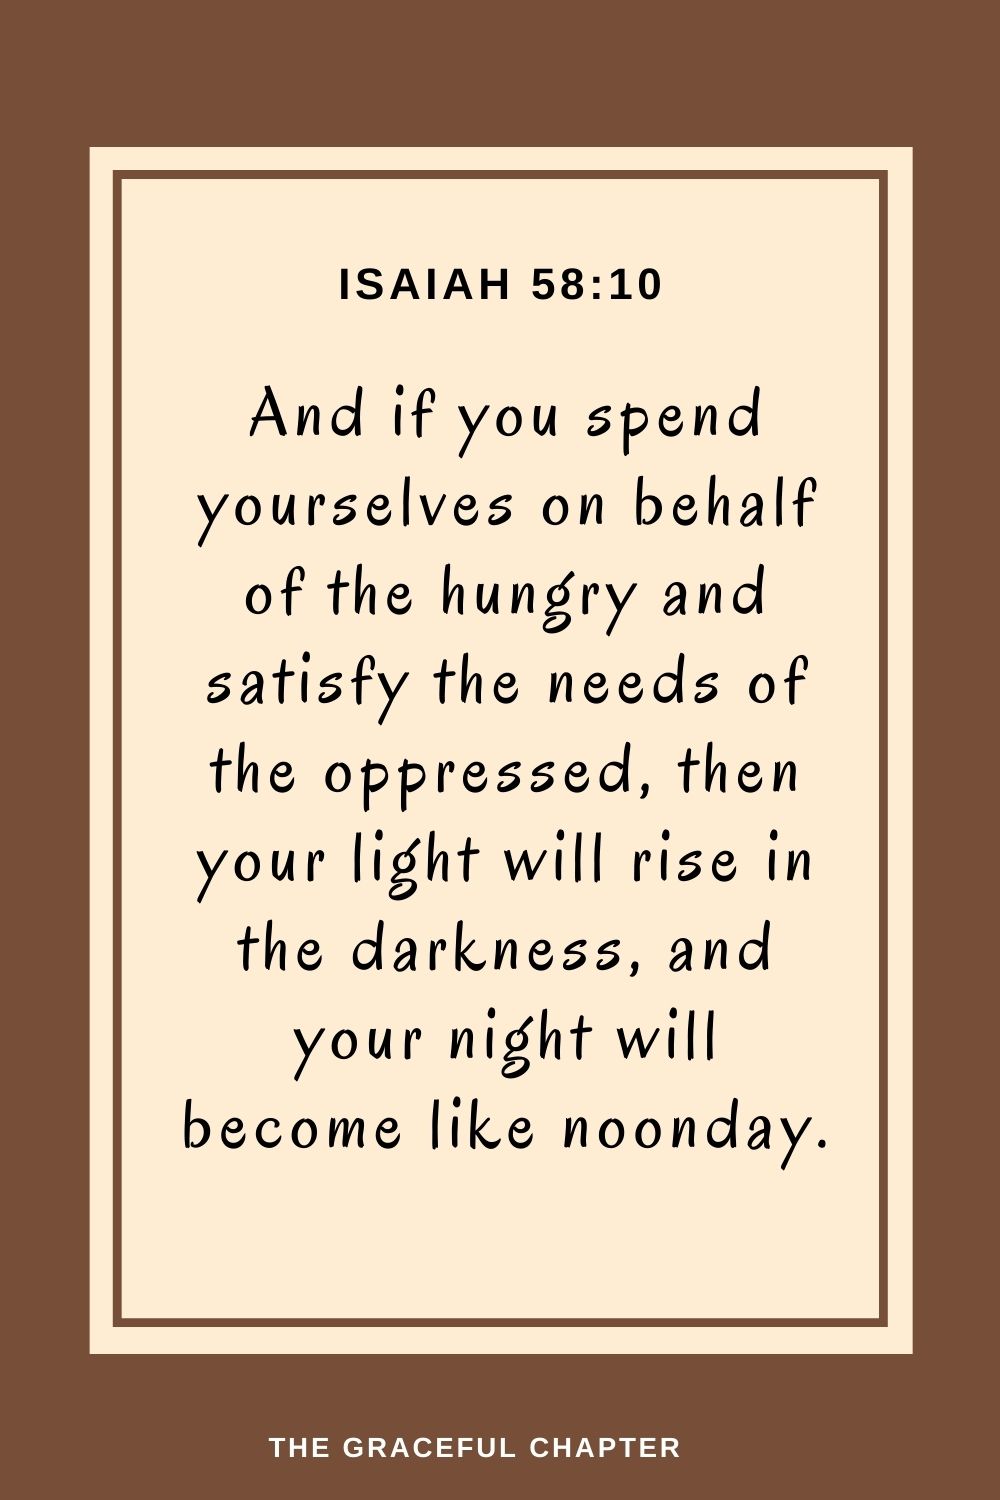 And if you spend yourselves on behalf of the hungry and satisfy the needs of the oppressed, then your light will rise in the darkness, and your night will become like noonday. Isaiah 58:10